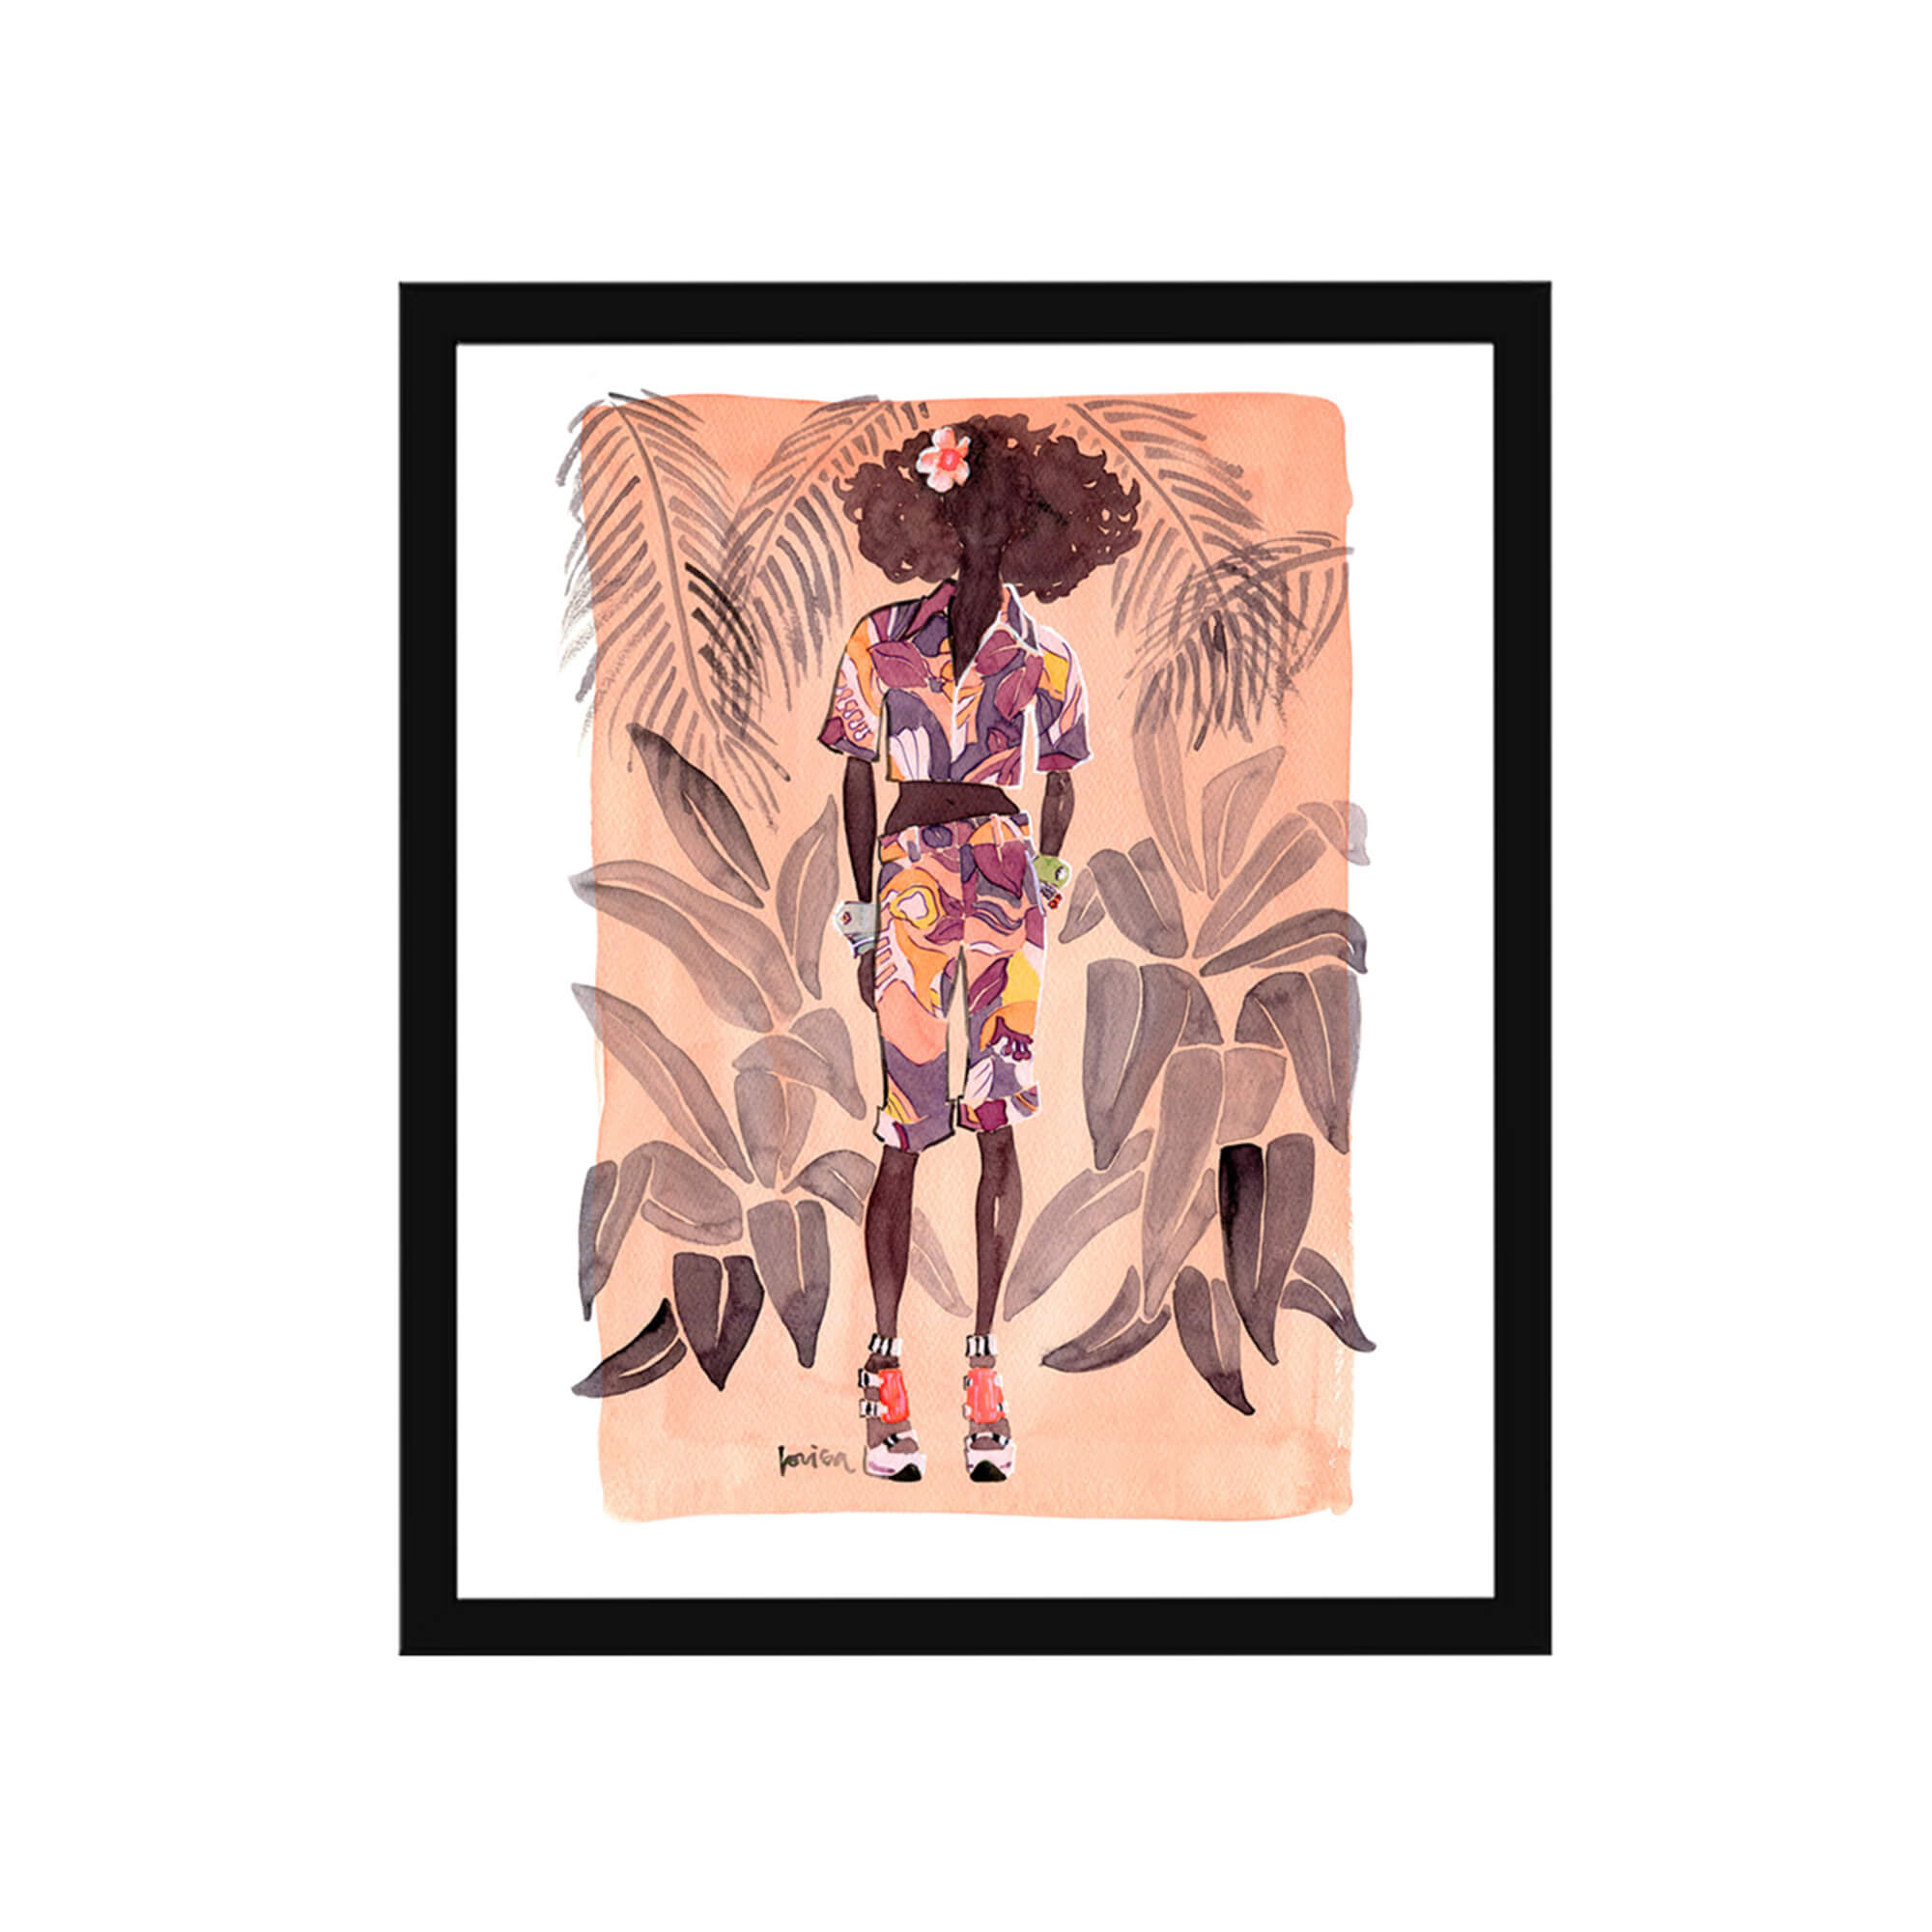 Framed paper giclée print of watercolor artwork featuring a woman wearing a retro attire and tropical background by Hawaii artist Lovisa Oliv